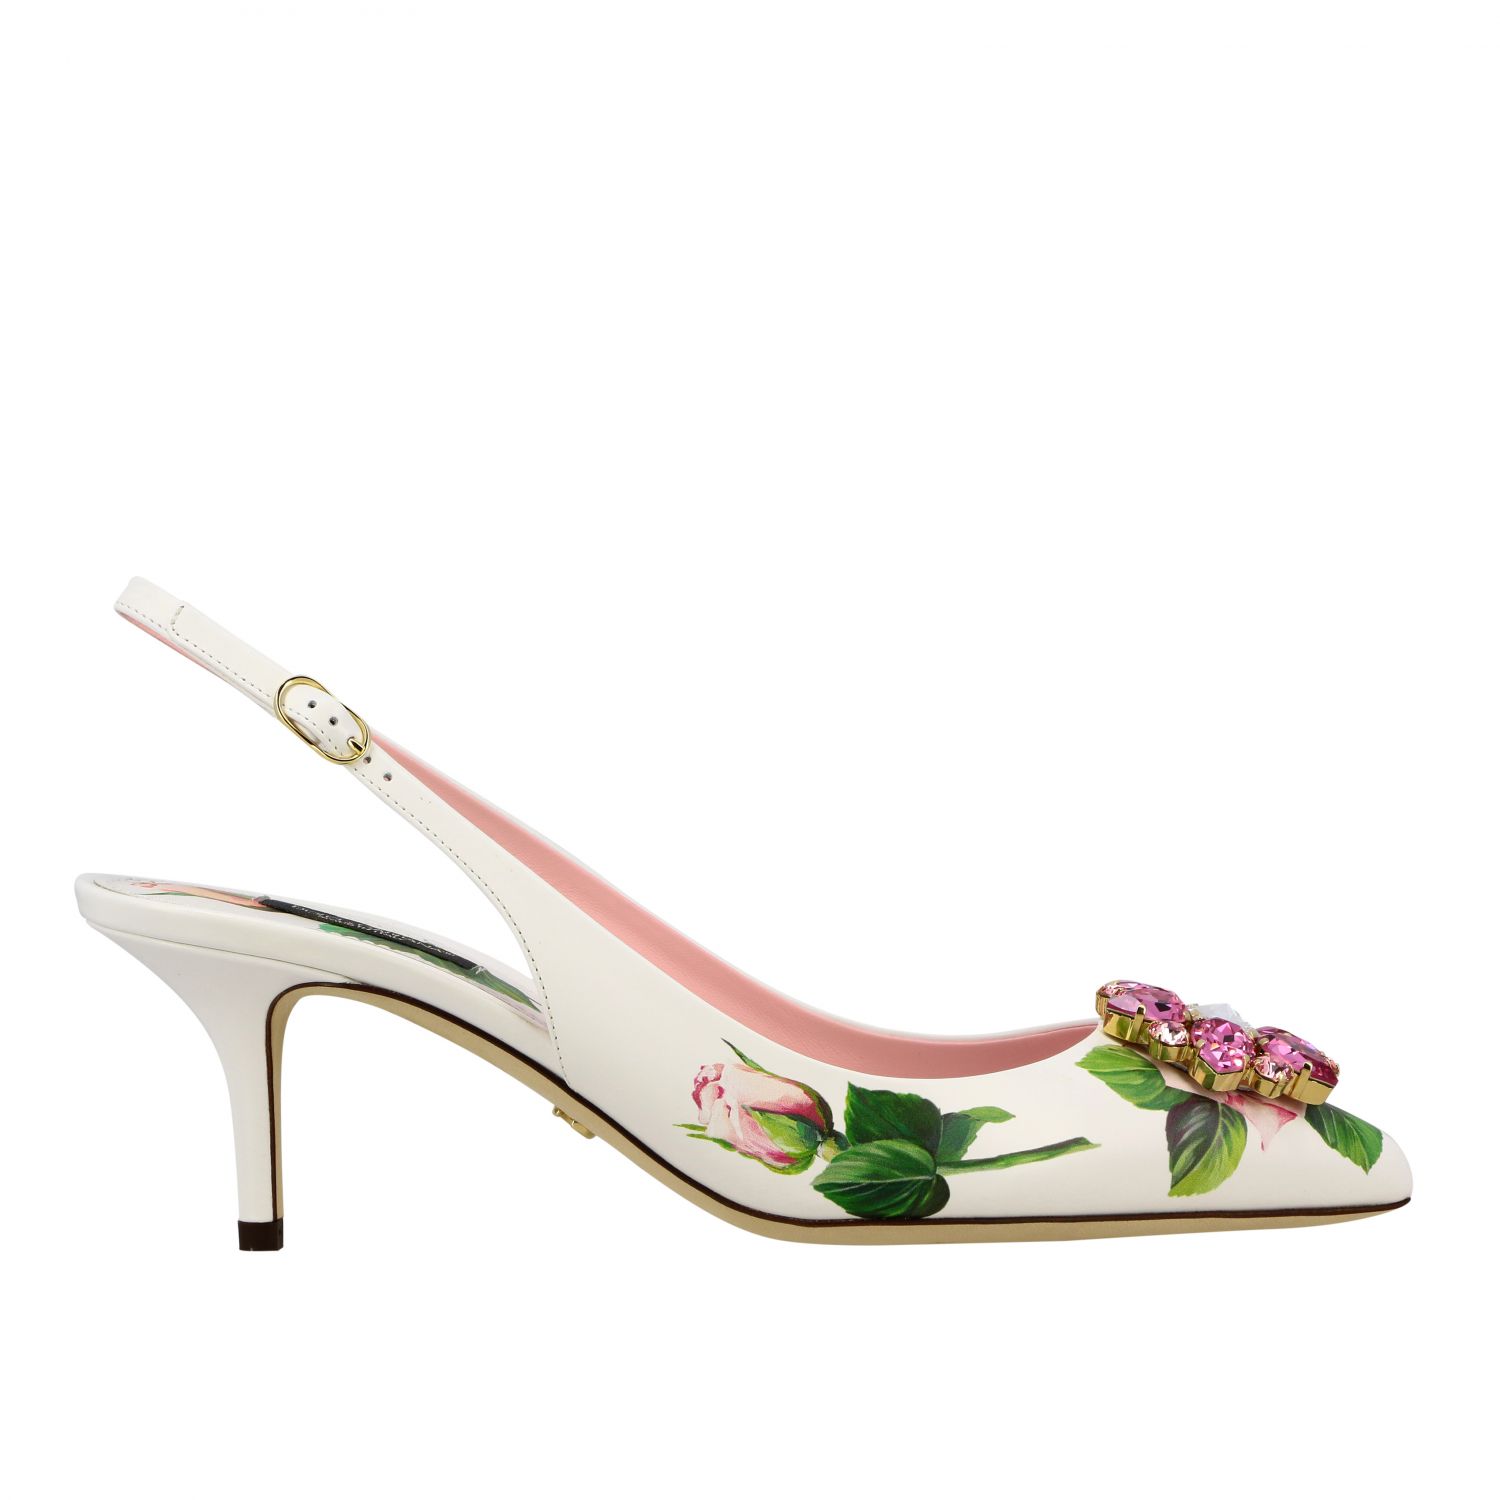 dolce and gabbana floral shoes